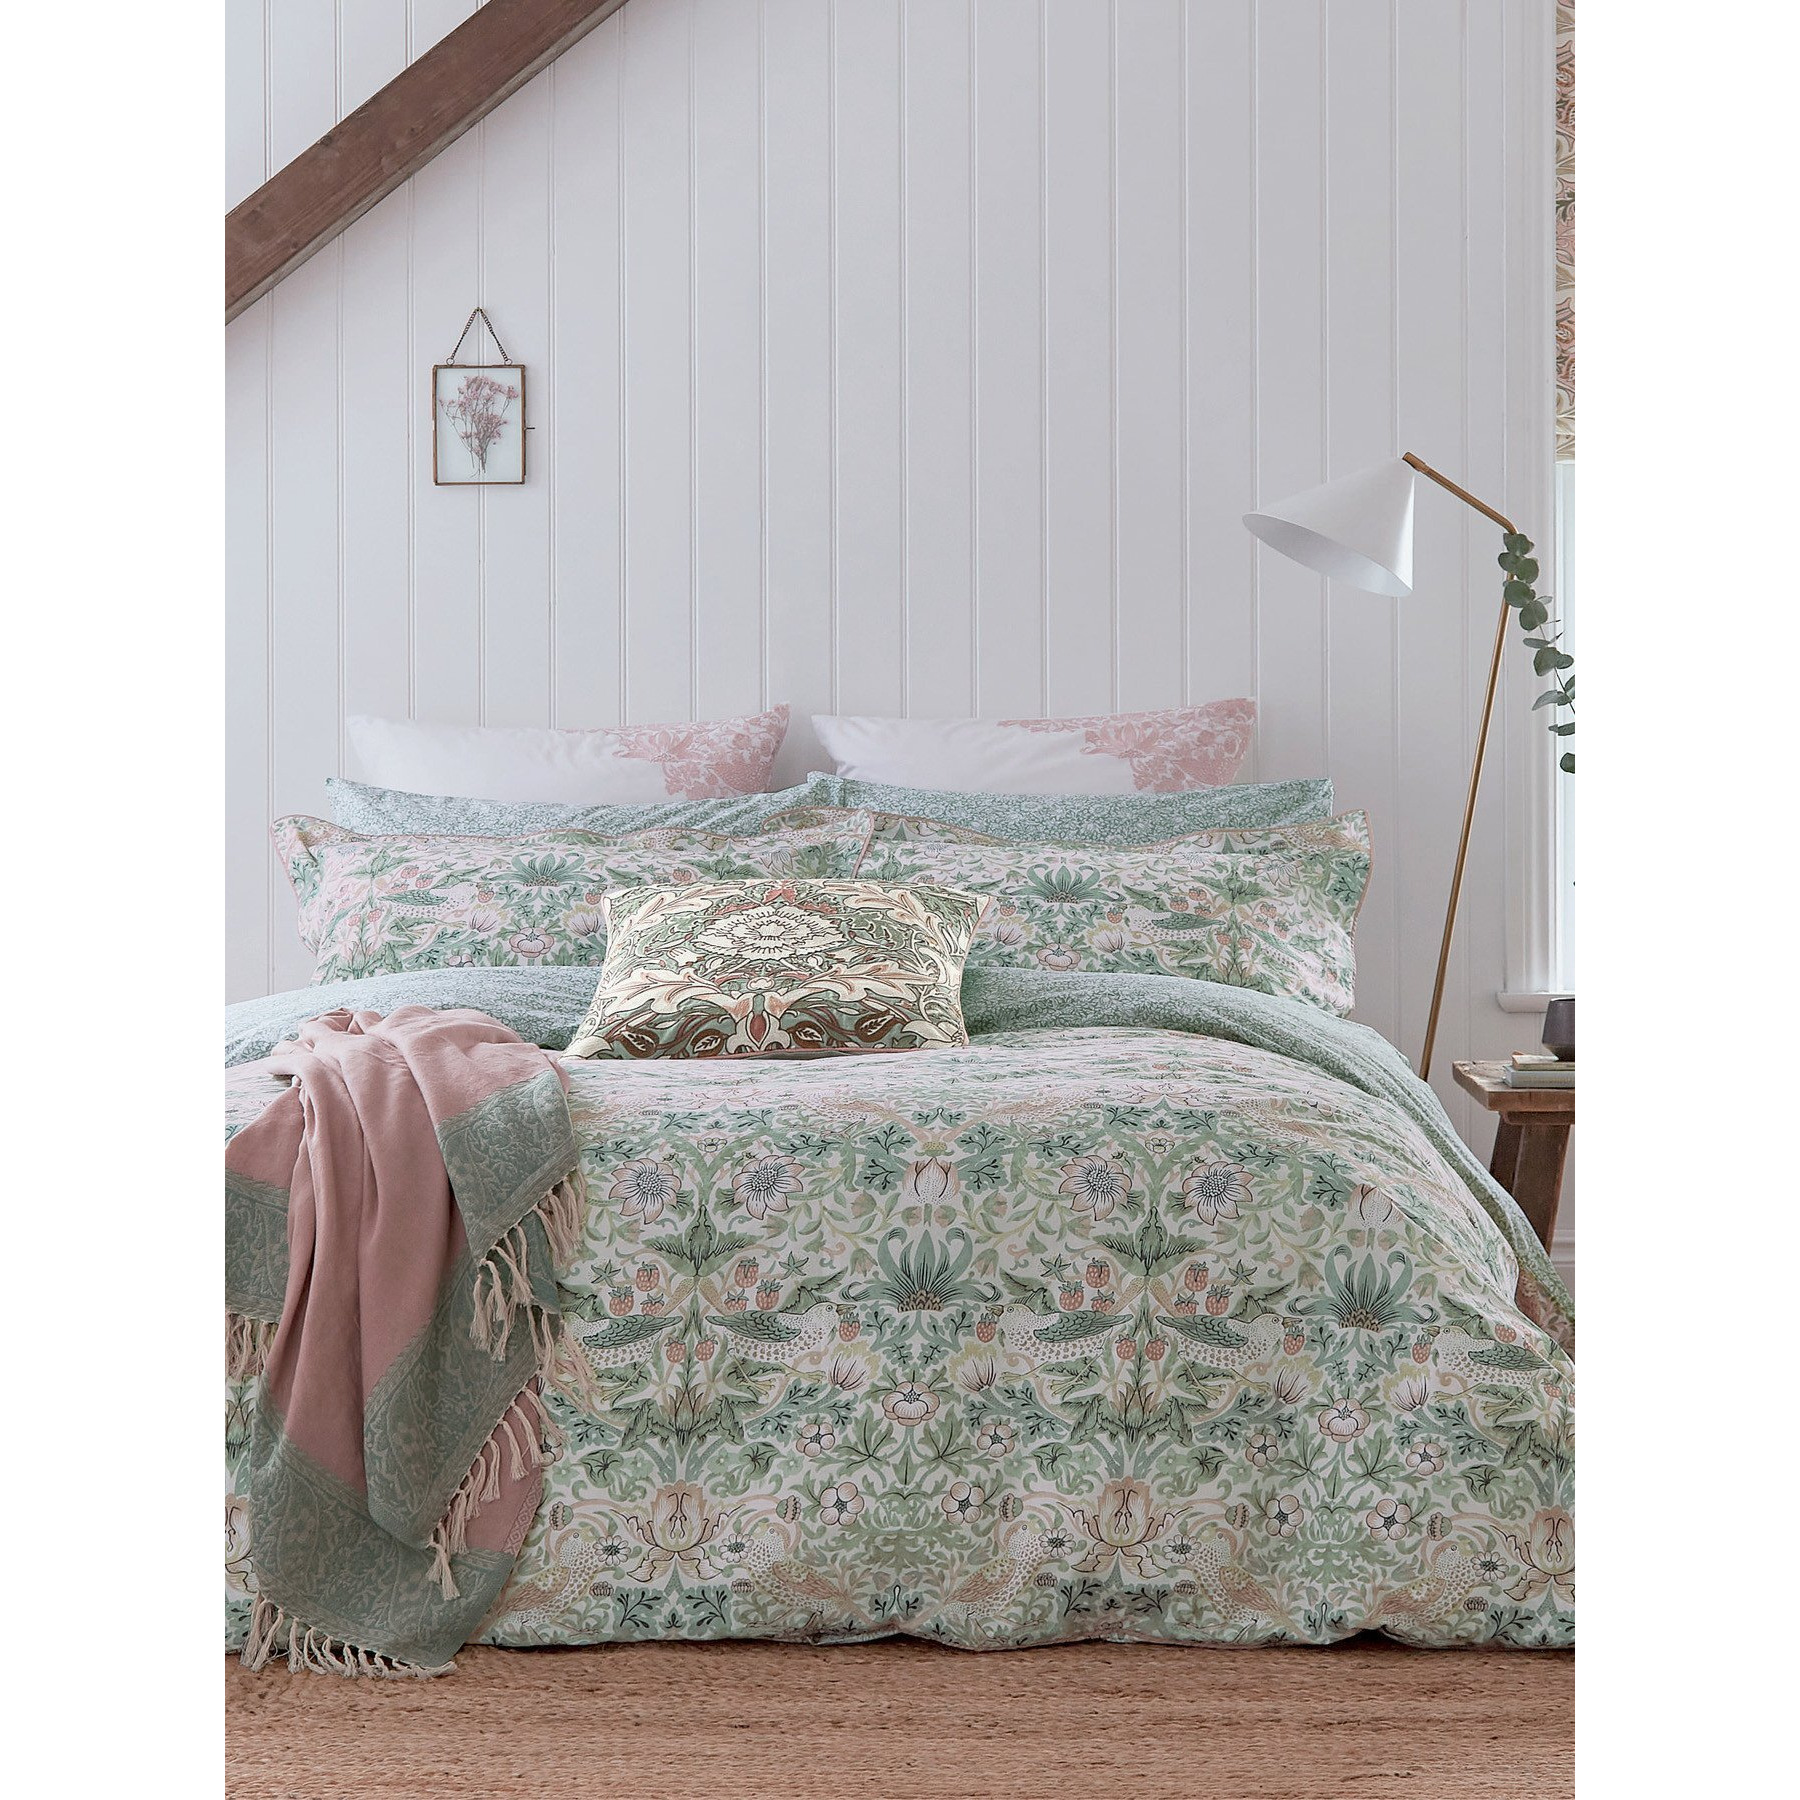 Morris & Co Strawberry Thief Duvet Cover - Size Single Pink - image 1